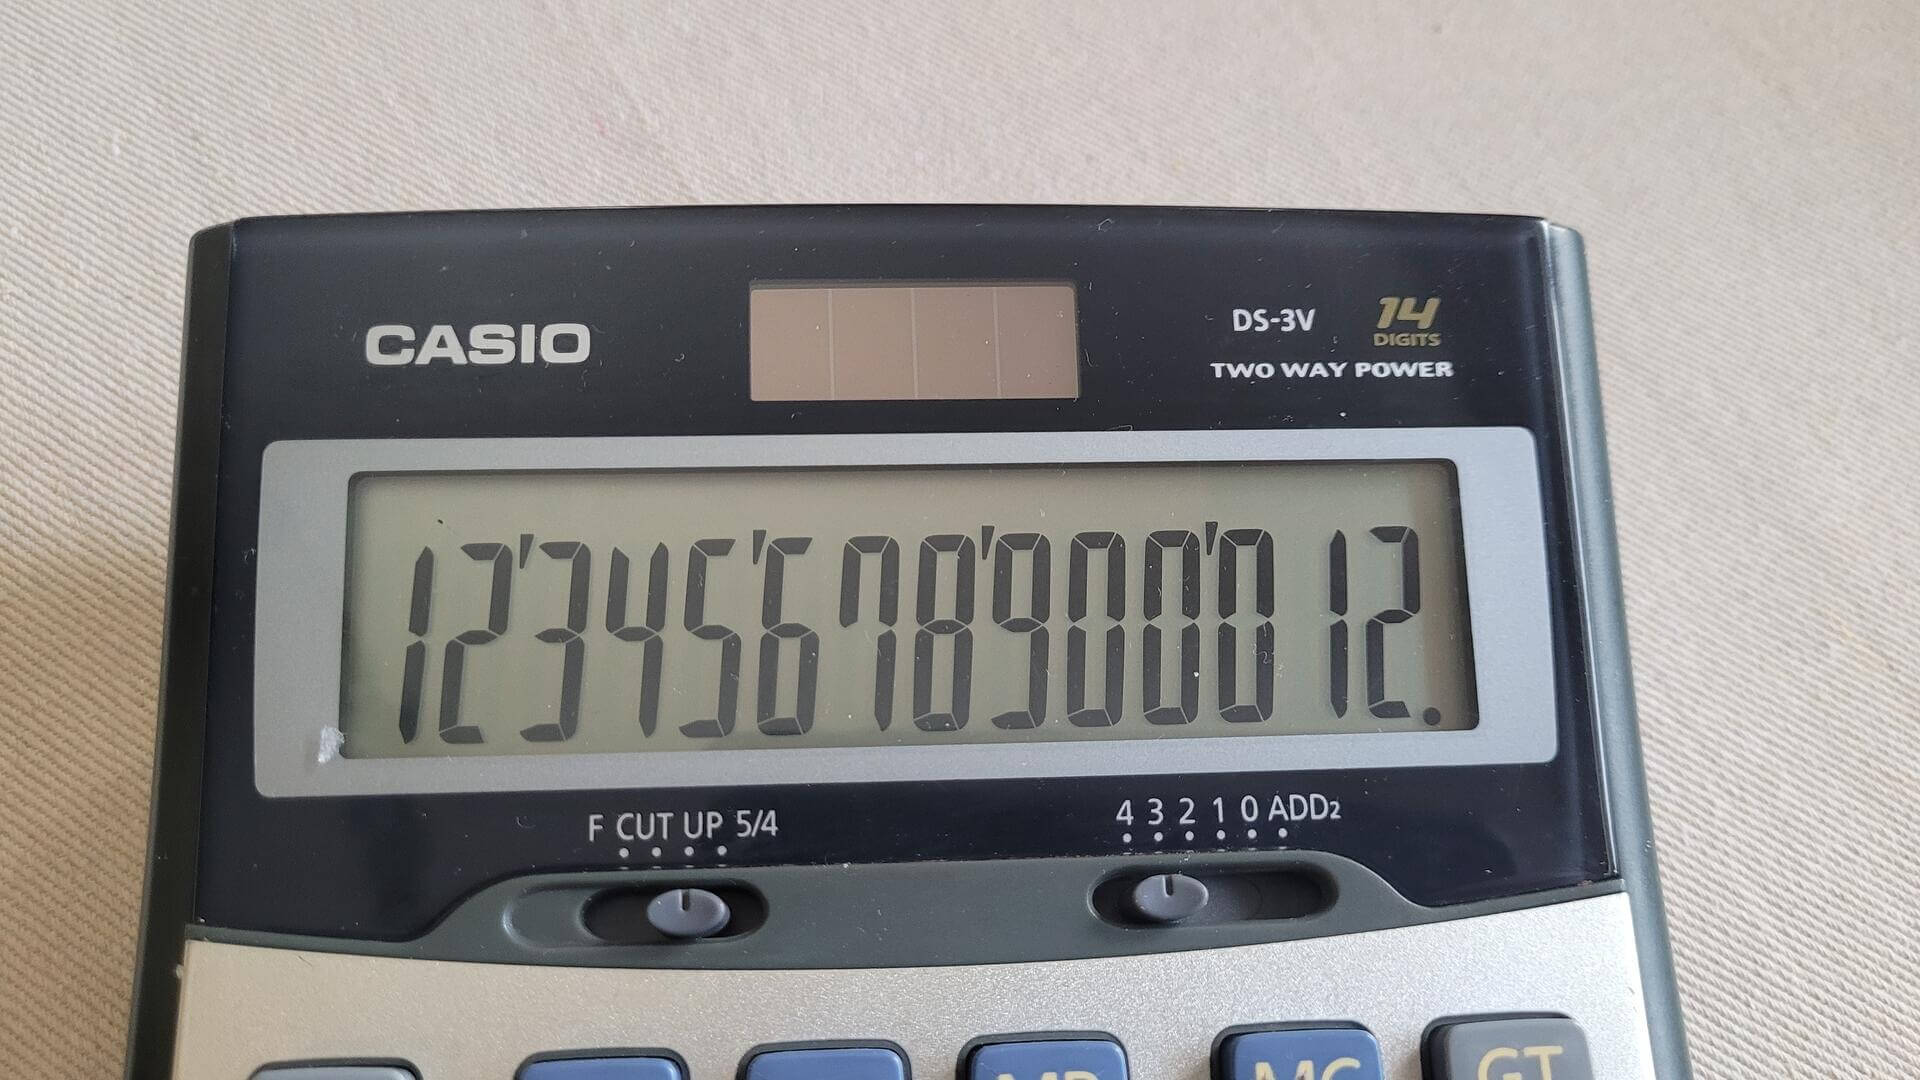 Business Casio DS-3V battery and solar powered desktop calculator with extra large display. Features include, 14 digits, Time calculation, function command signs